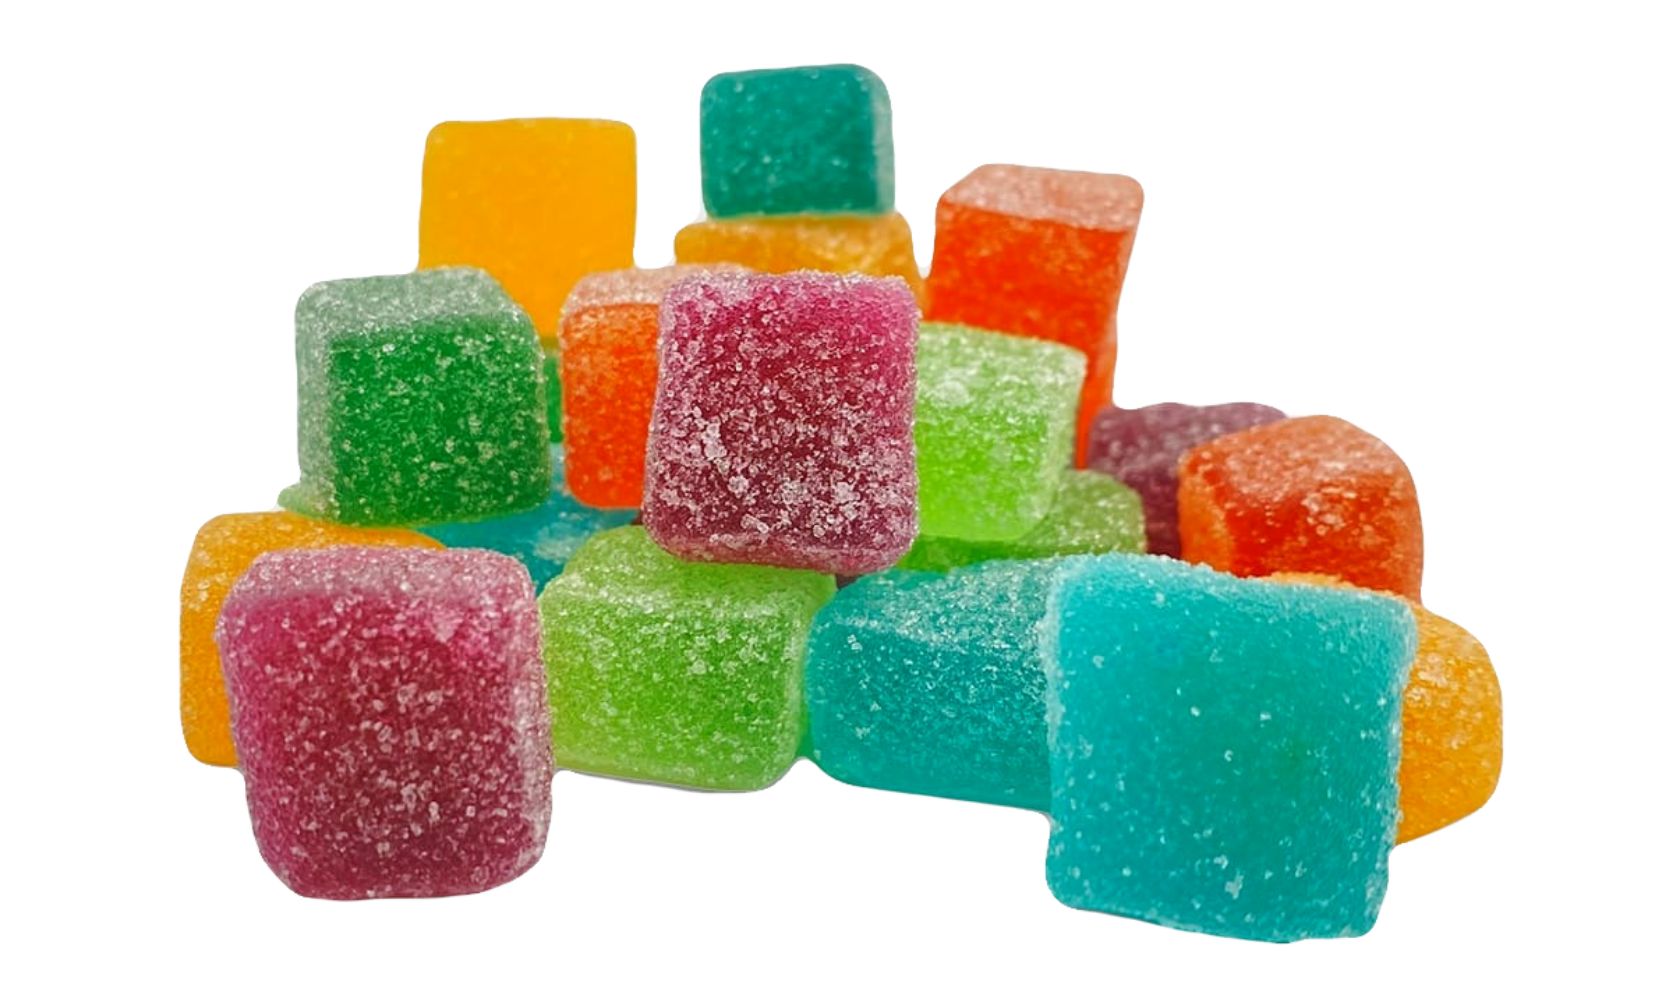 We’ve gathered up the best THC gummies for sale that will get you more than half-baked! Discover the tasty flavours, dosage recommendations, and more!